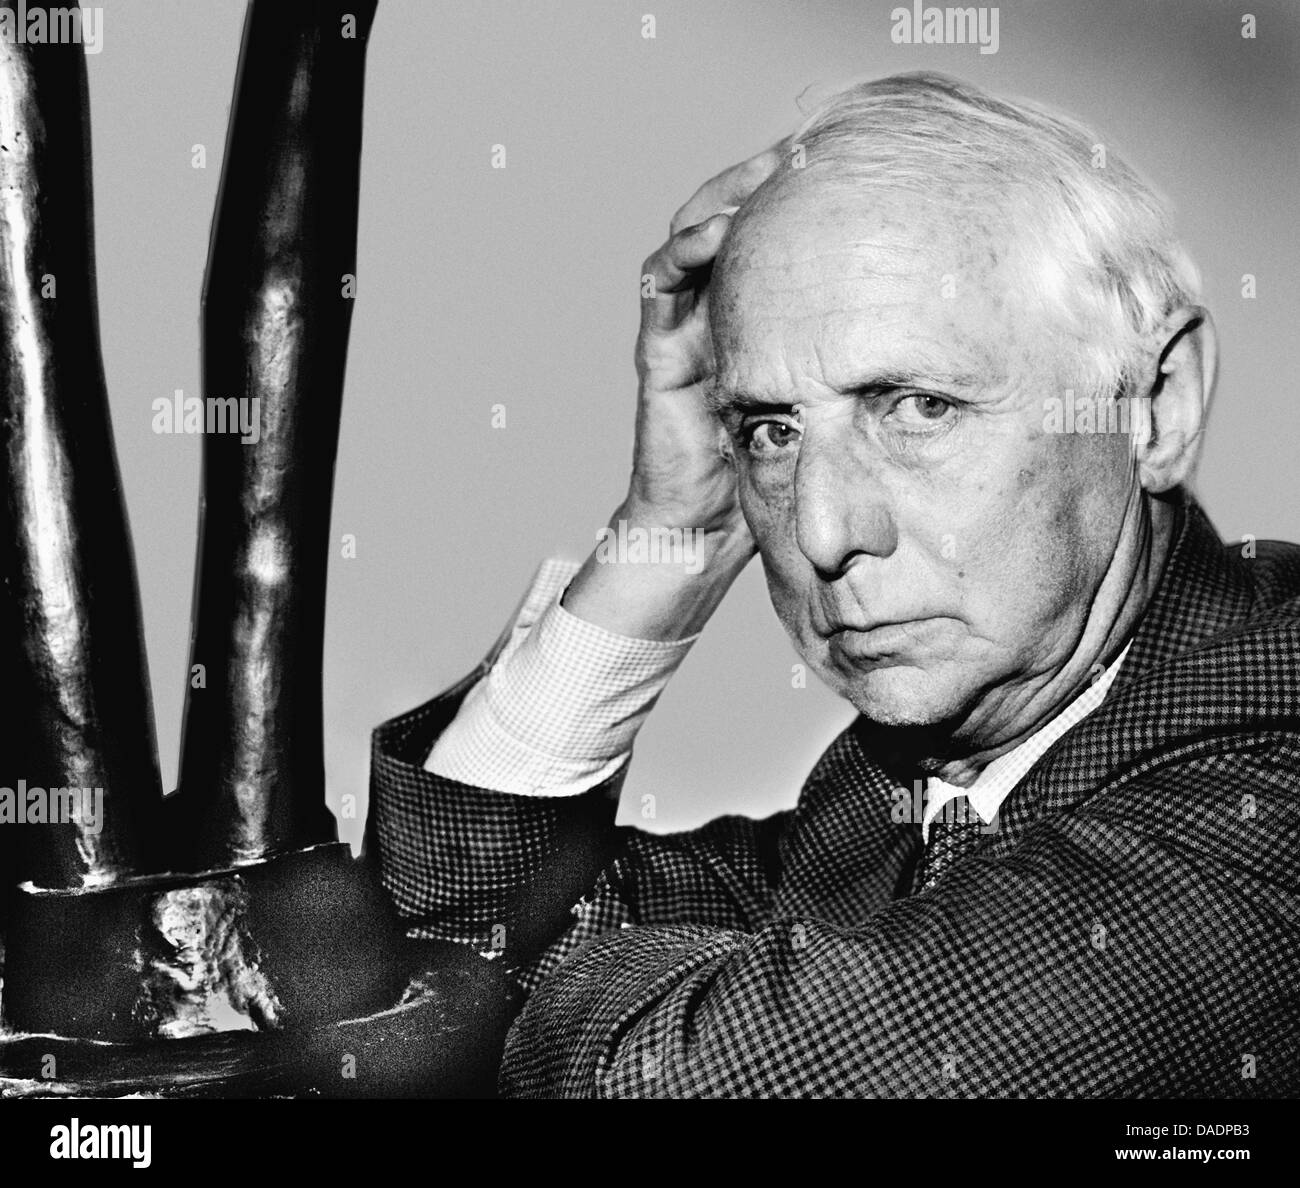 Artist Max Ernst in 1962. Portrait by photographer Fred Stein (1909-1967) who emigrated 1933 from Nazi Germany to France and finally to the USA. Stock Photo